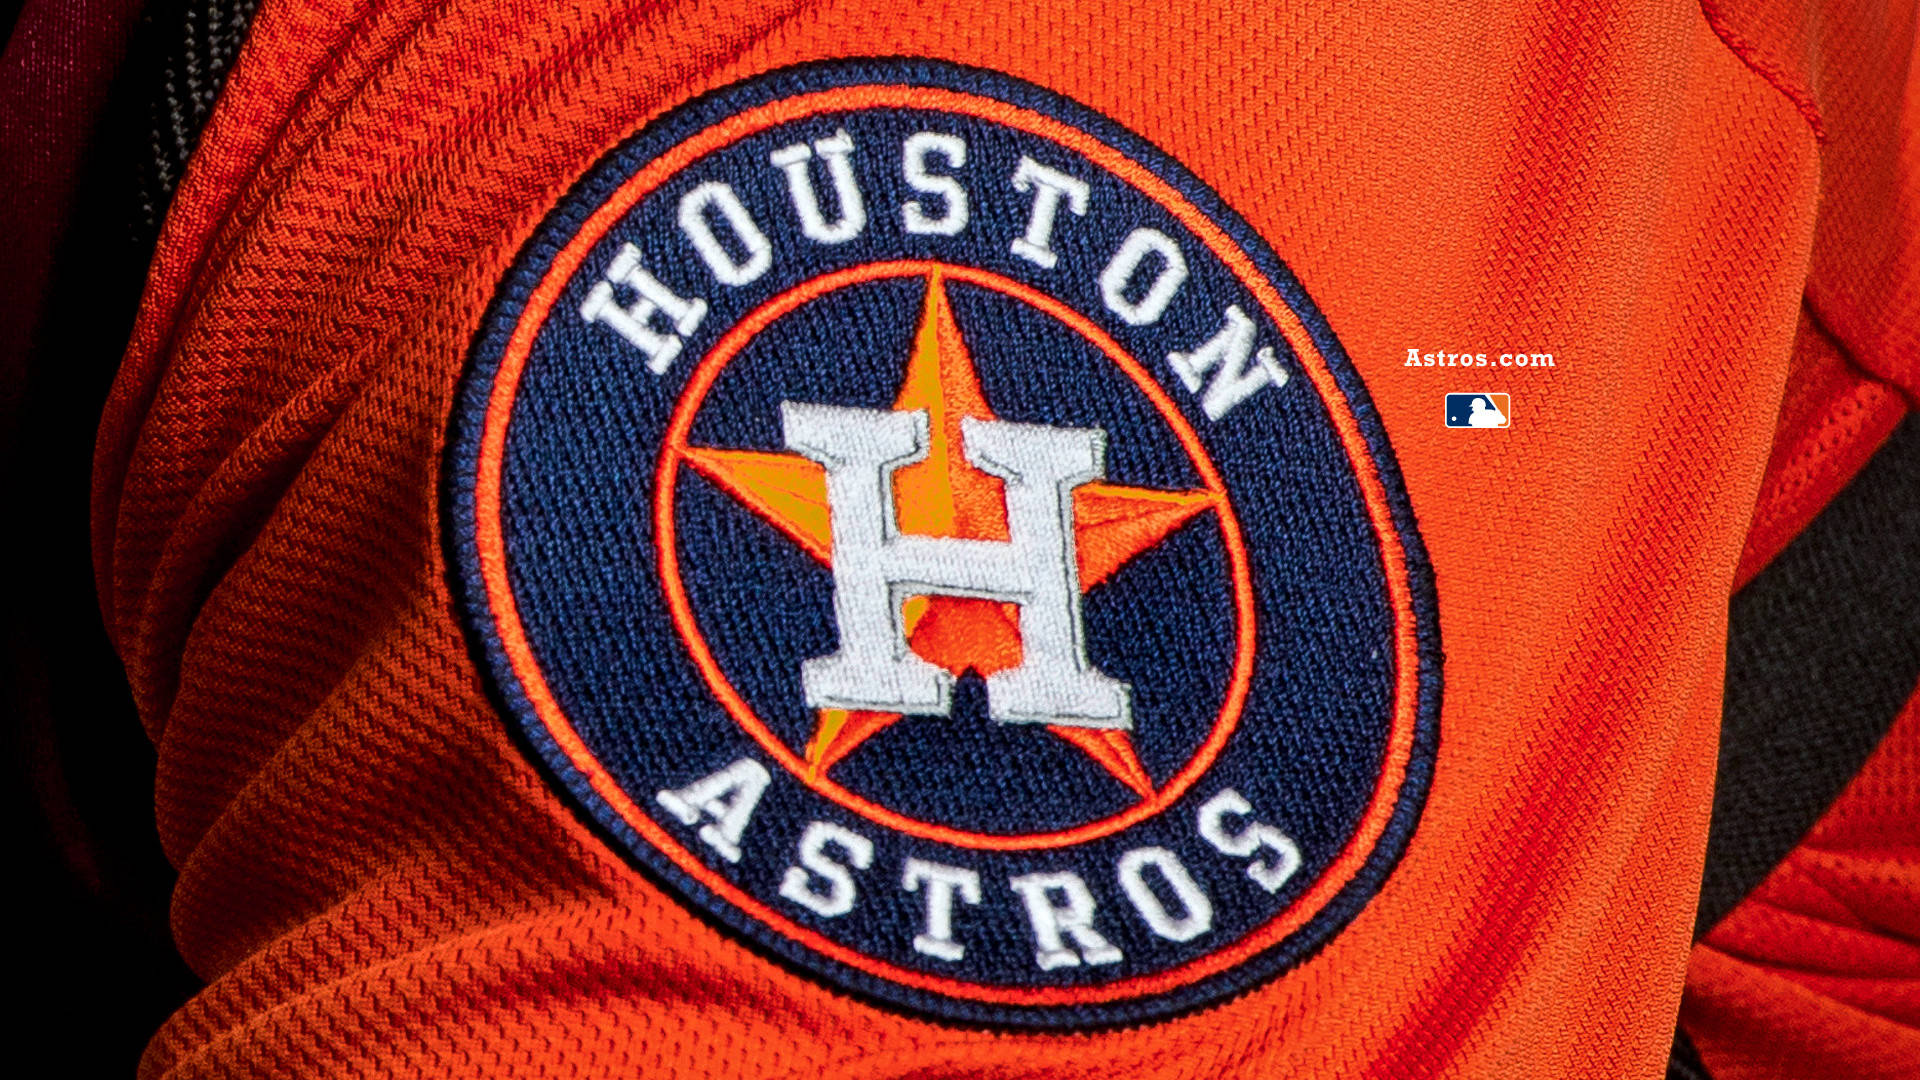 1920X1080 Houston Astros Wallpaper and Background